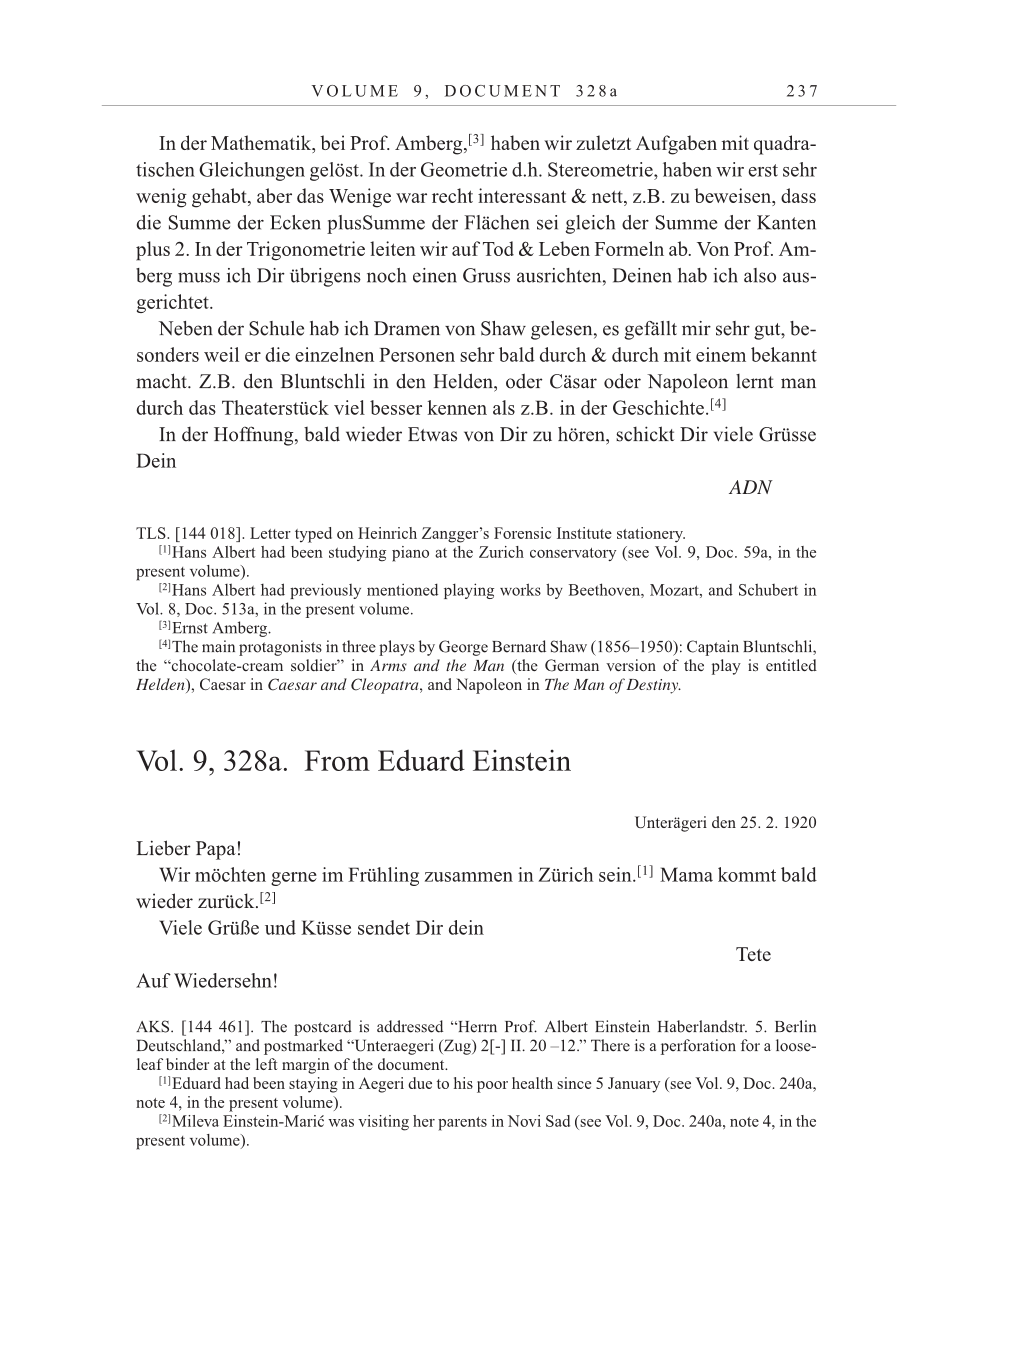 Volume 10: The Berlin Years: Correspondence May-December 1920 / Supplementary Correspondence 1909-1920 page 237